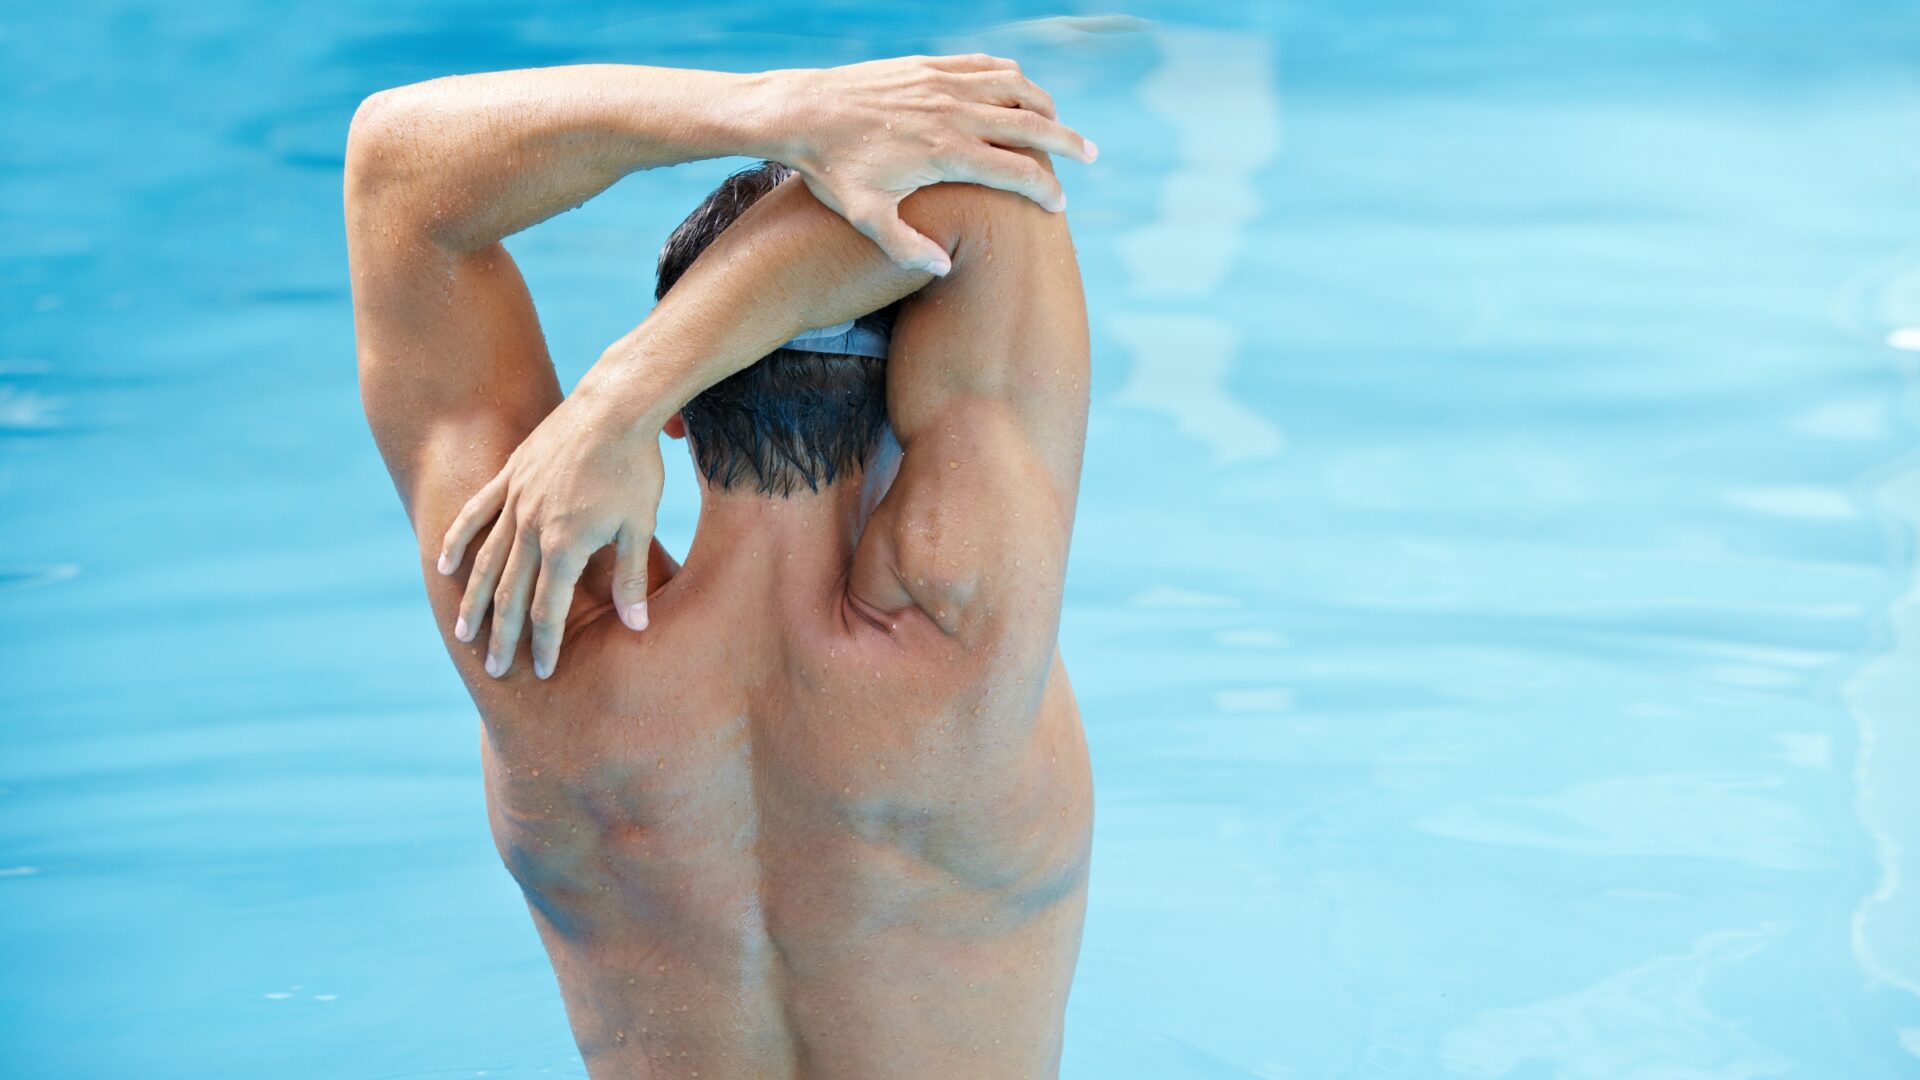 Rear view of a swimmer's upper torso while they stretch their arms behind their head.